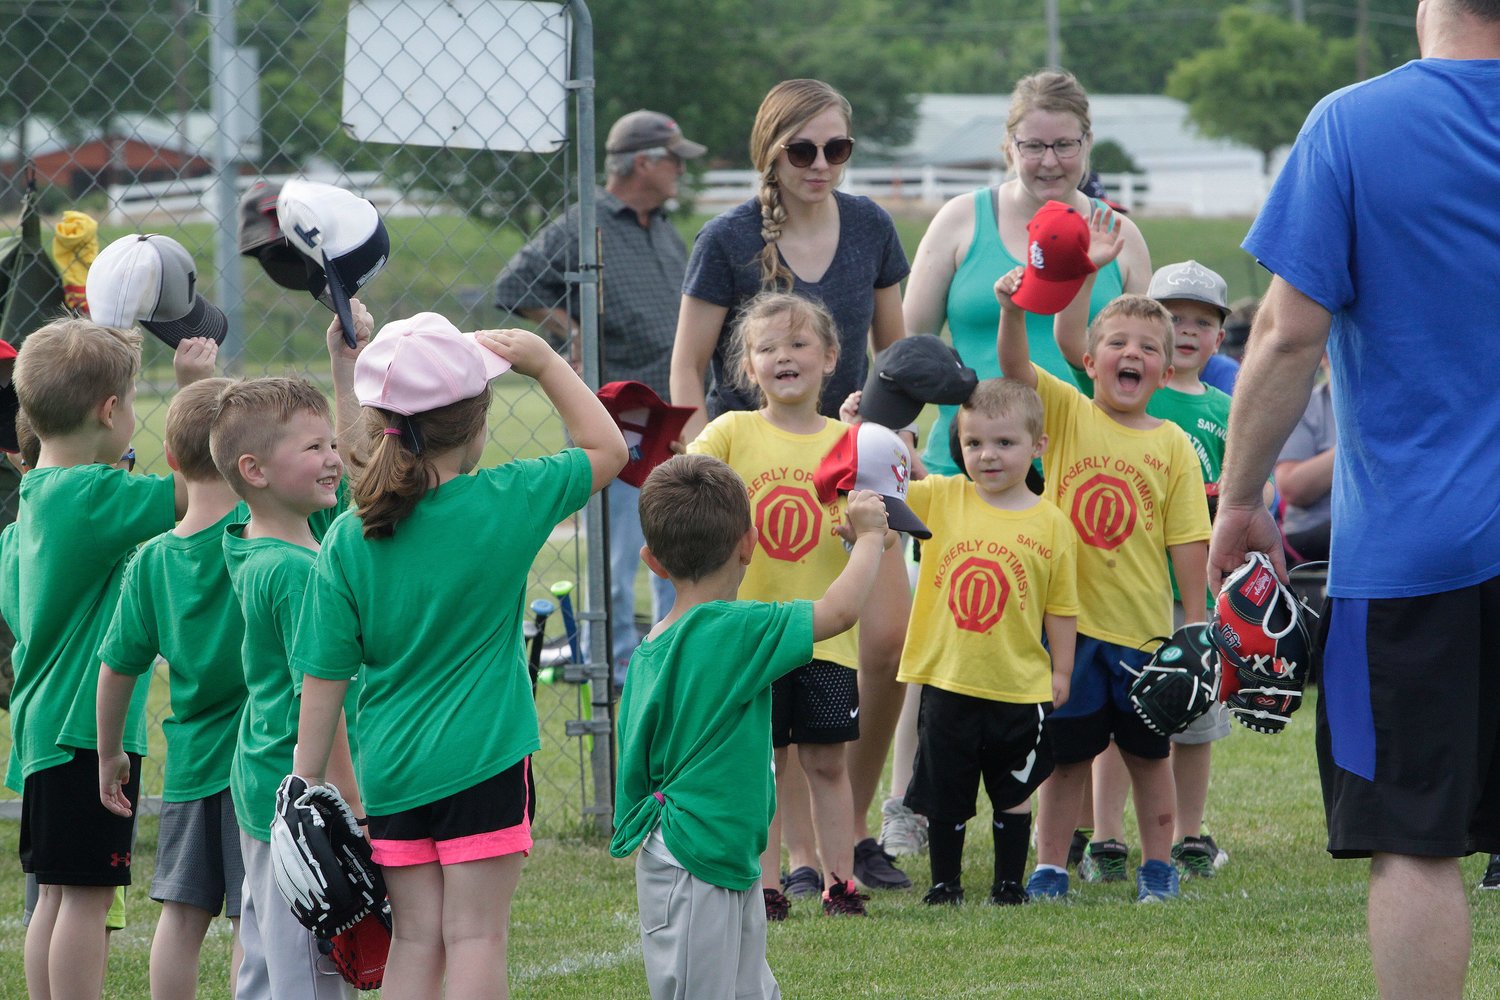 Players with the Huntsville Hawks (green shirts) and Higbee Tigers age 4-5 year old teams of the Moberly Optimist Club T-ball League salute one another following a league game played this summer at the Howard Hils Athletic Complex.